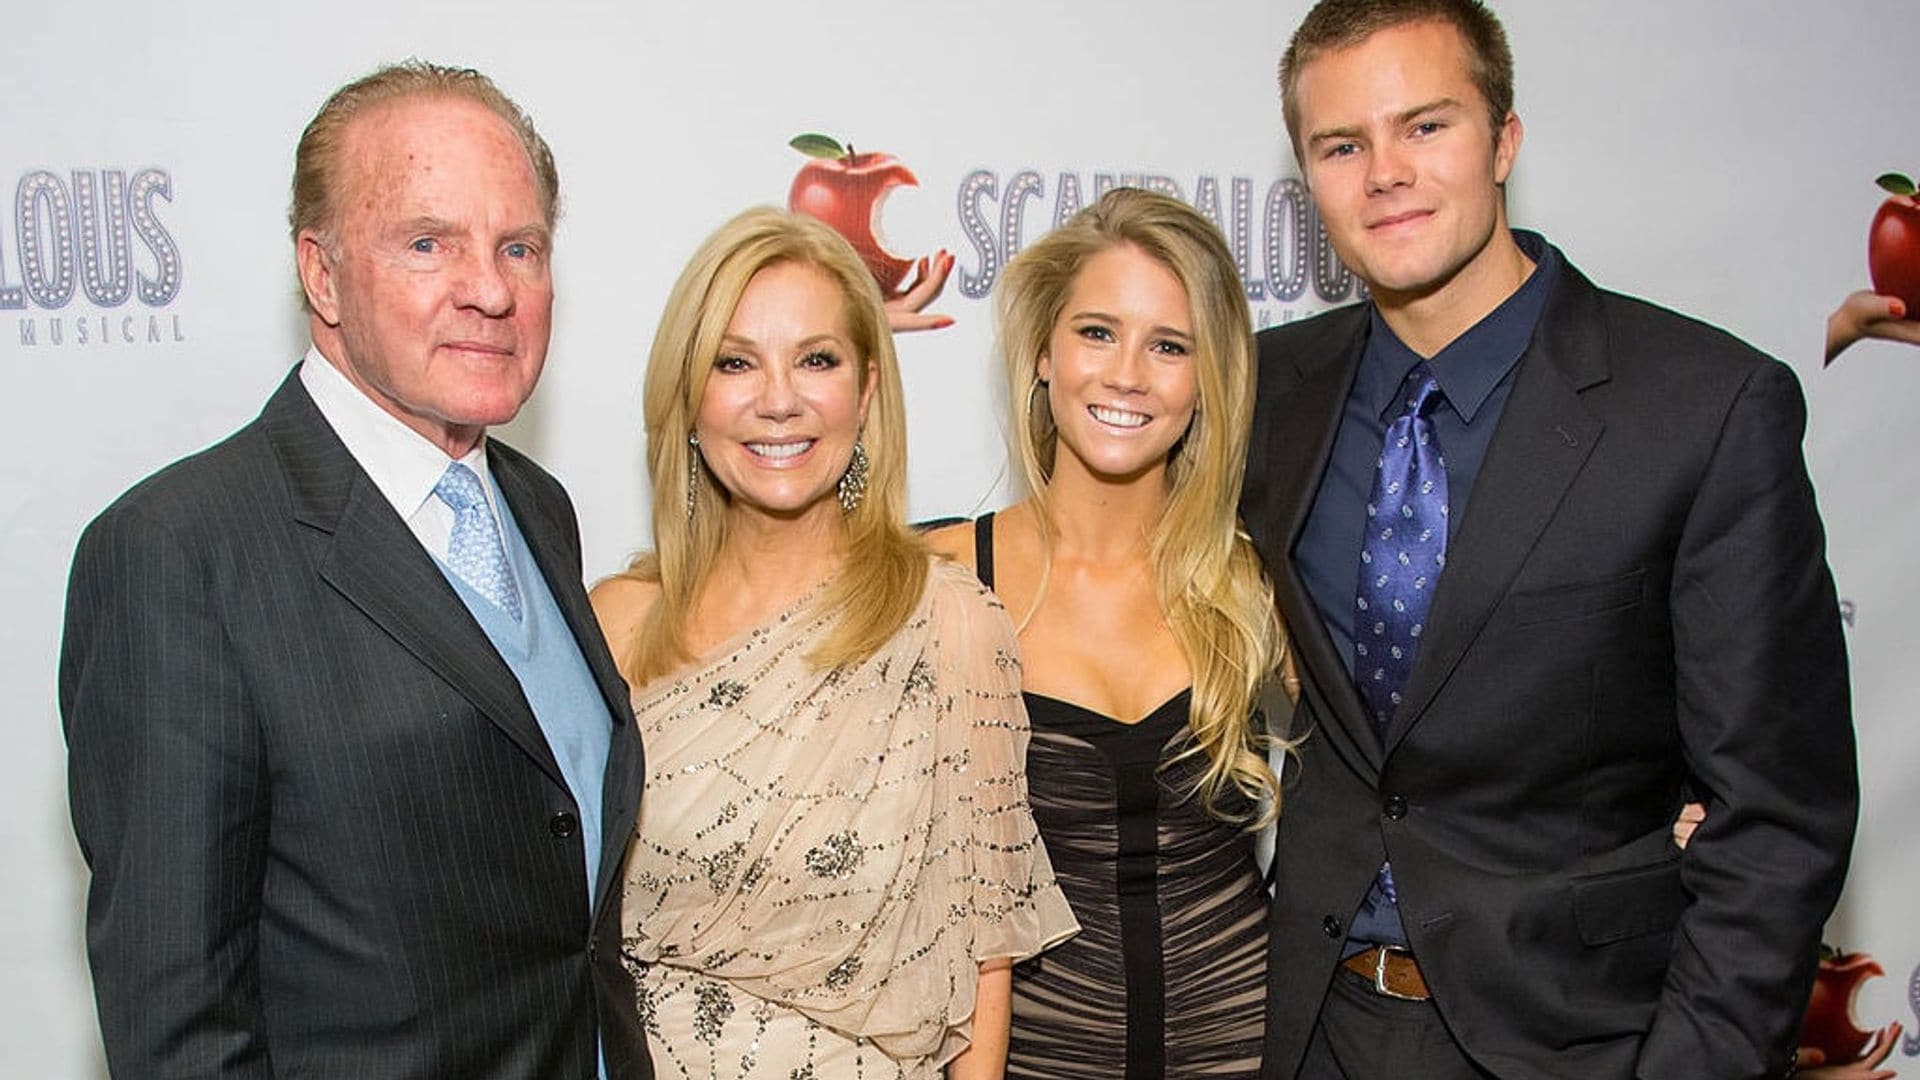 Kathie Lee Gifford is adjusting to the 'new normal' without husband Frank Gifford